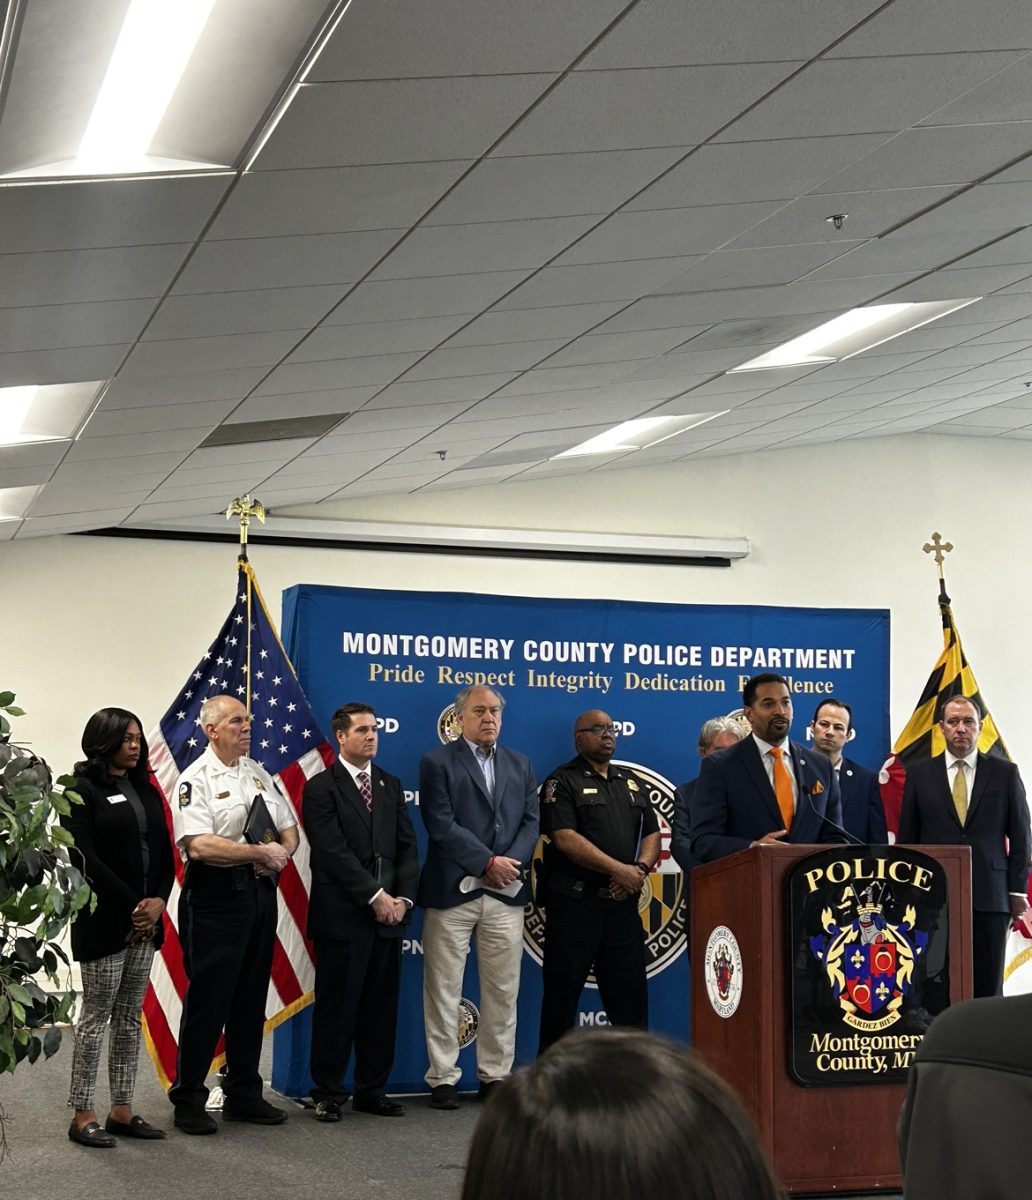 MCPS+officials+speak+at+a+press+conference+at+the+Montgomery+County+Police+Department+First+District+on+Apr.+19+regarding+the+arrest+of+former+student+Alex+Ye.